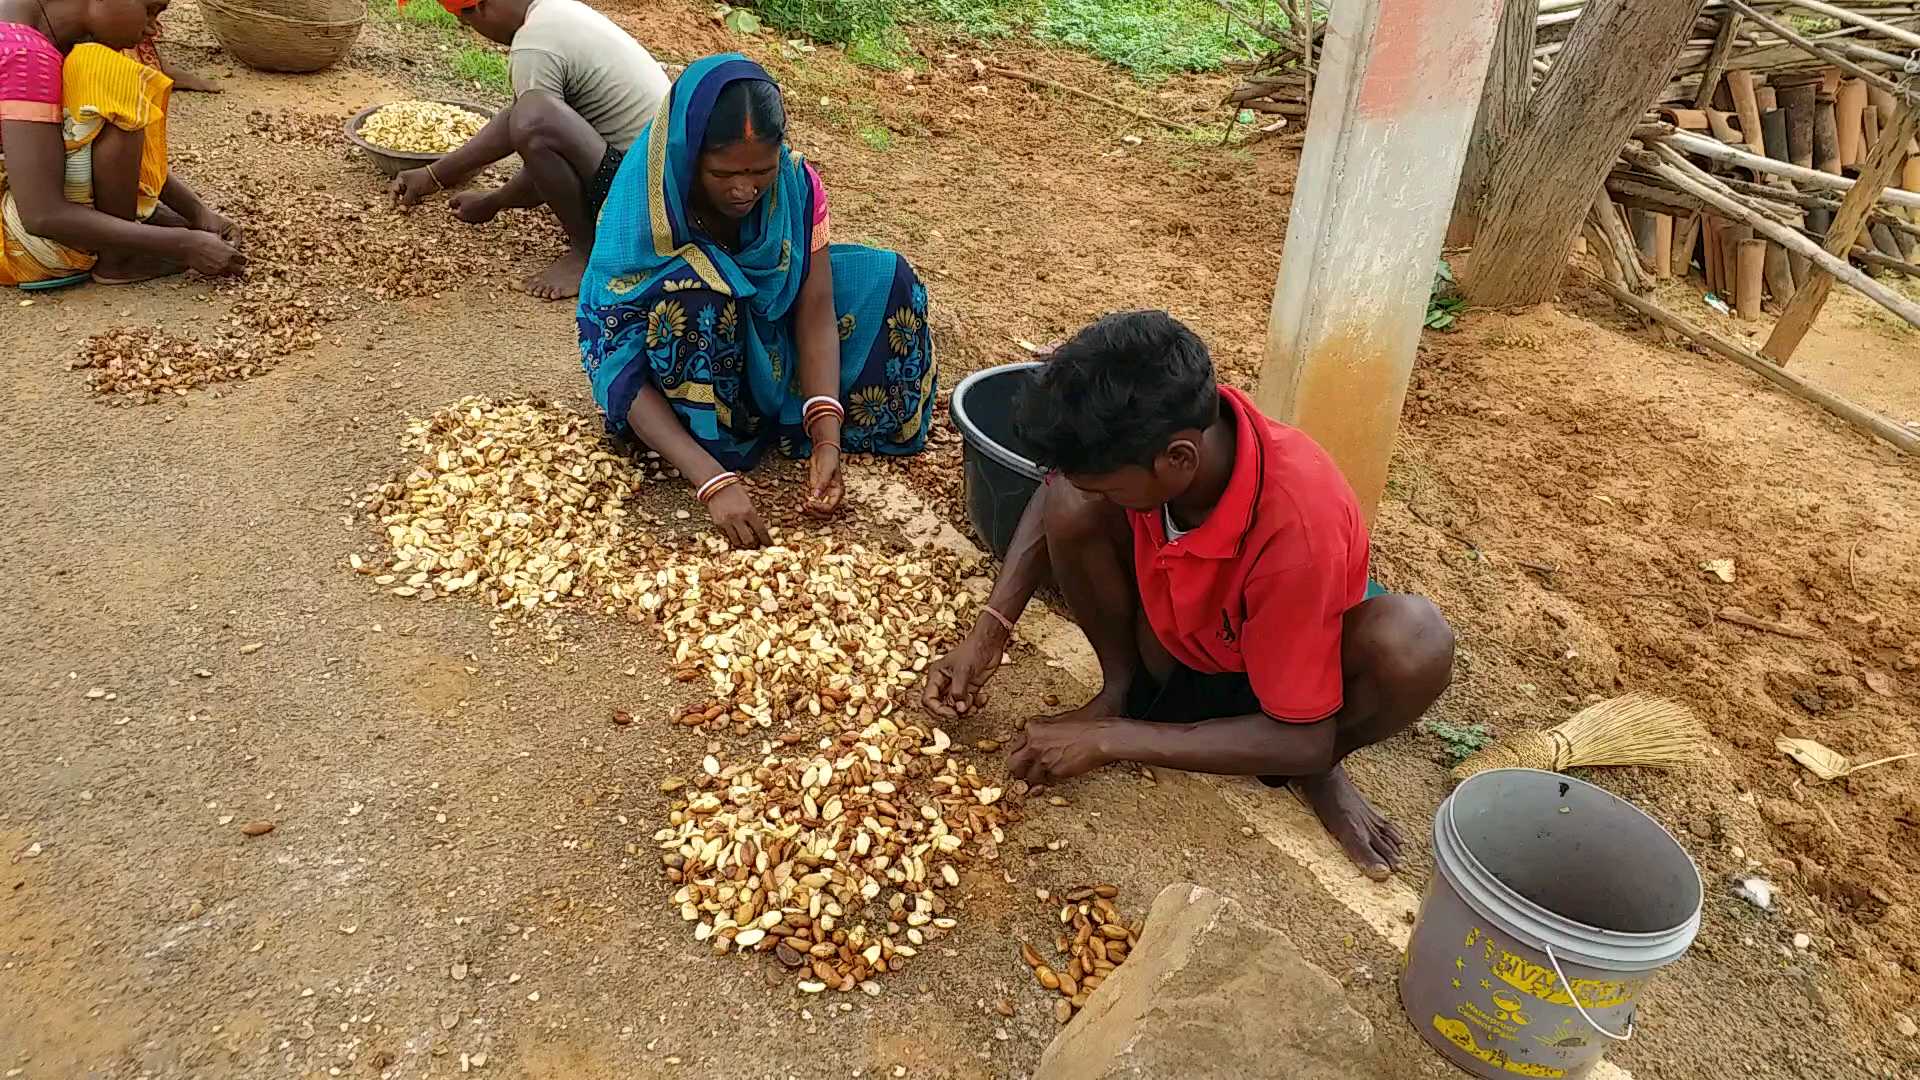 medicinal-properties-mahua-fruit-oil-villagers-bring-to-use-in-latehar